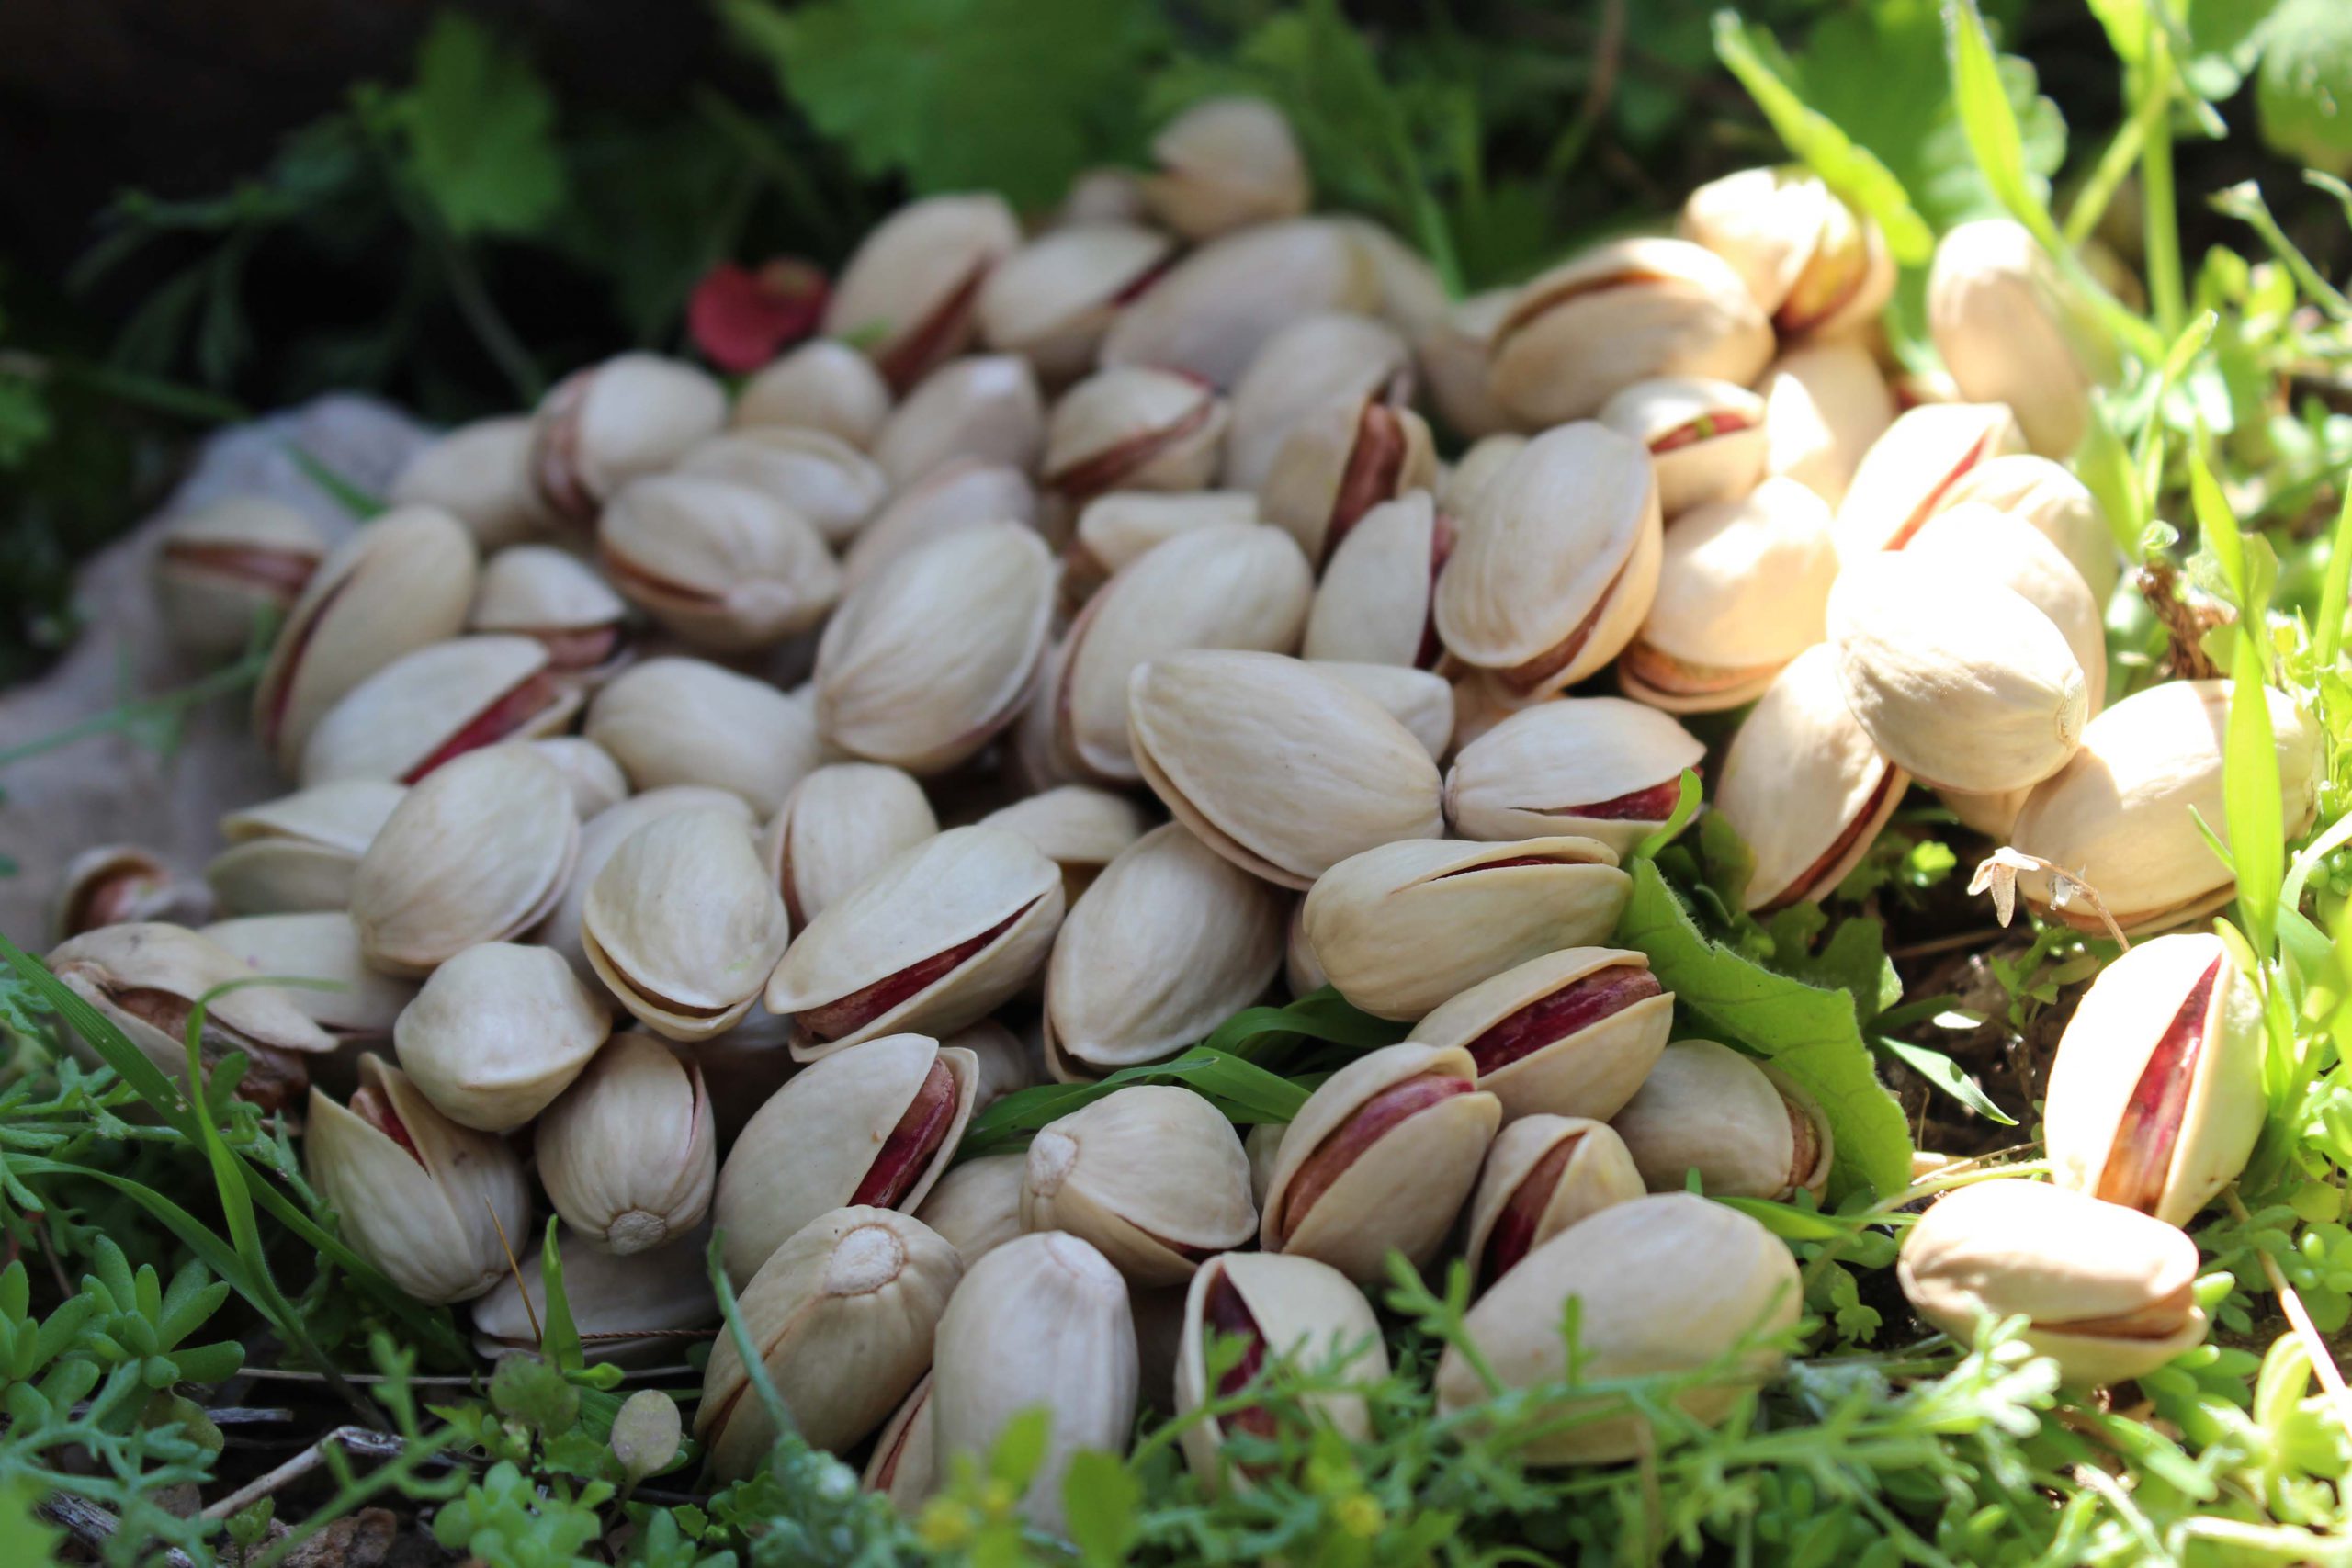 Buy Nutex First class Pistachios Online